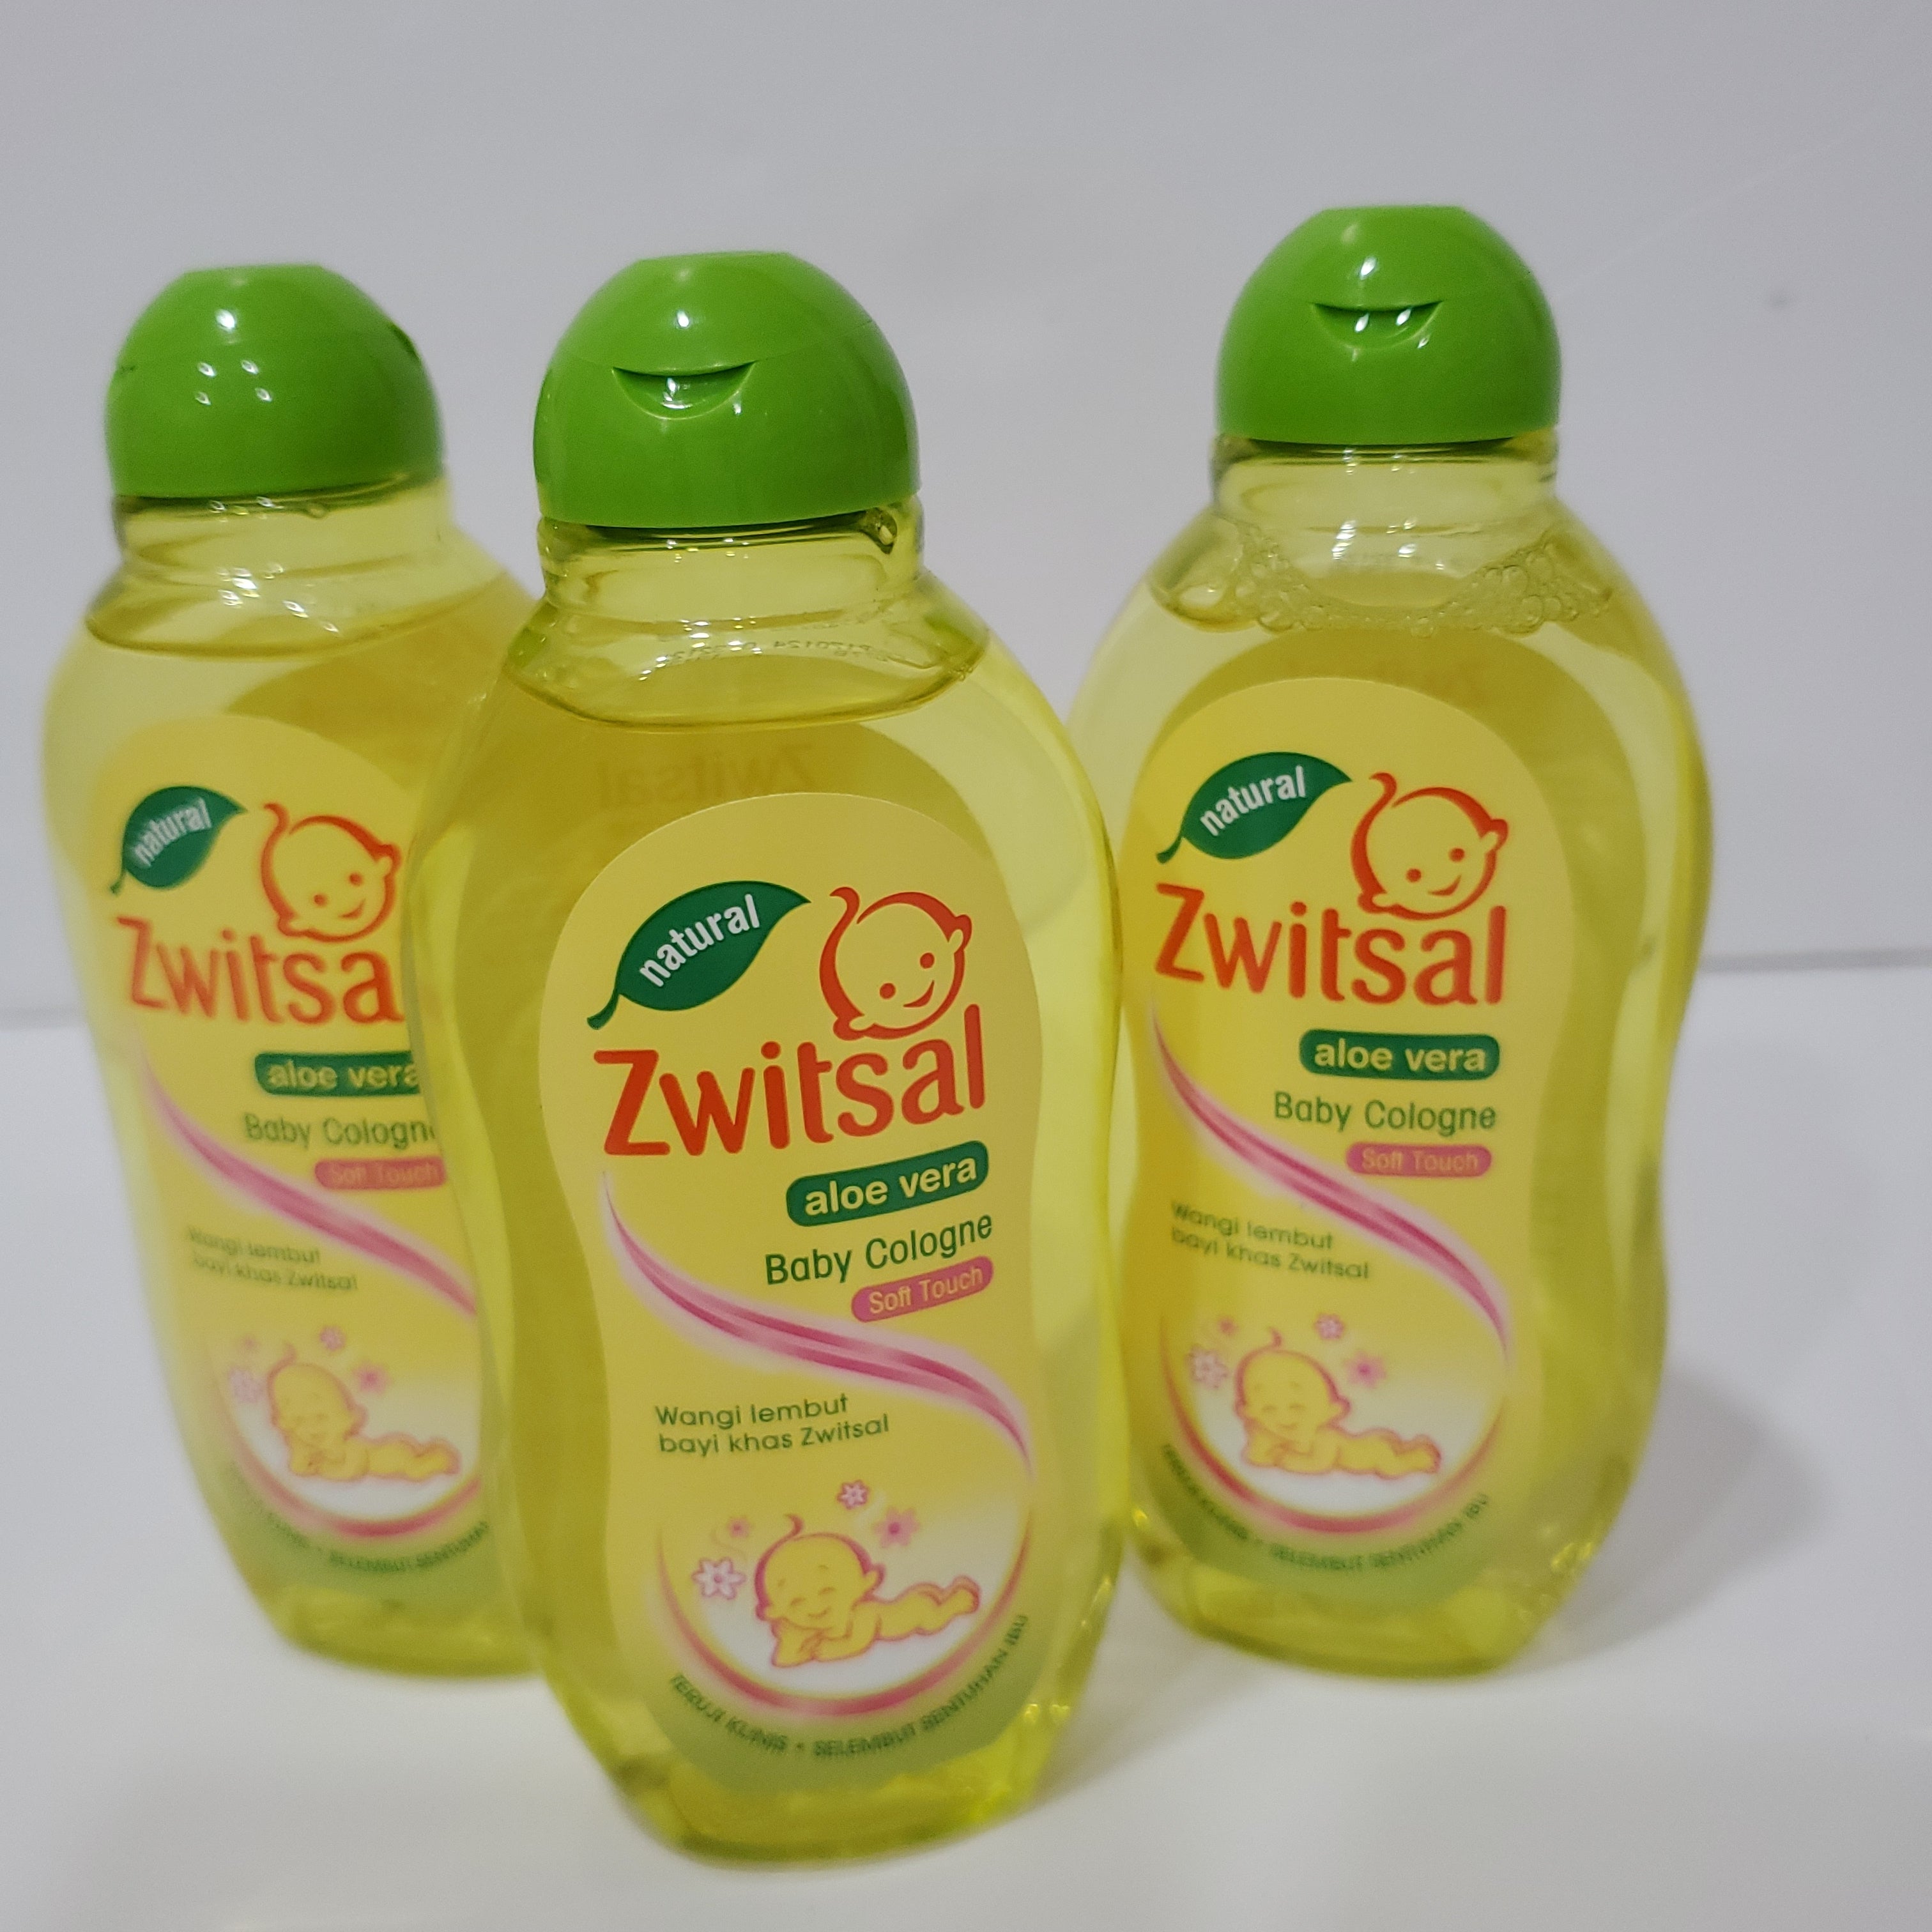 Zwitsal baby cologne